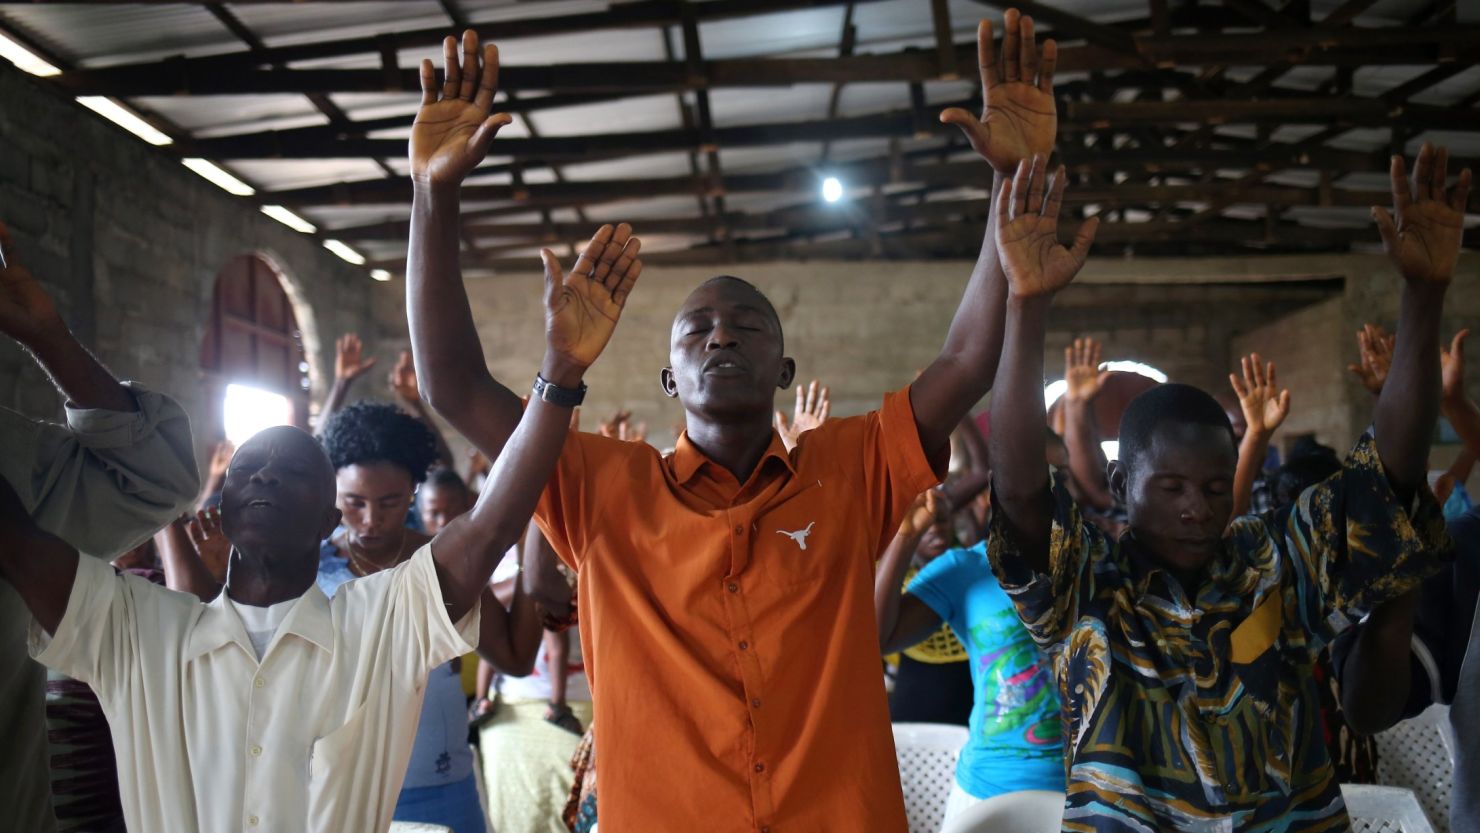 Church members pray during a Sunday service at a church in Dolo Town, Liberia, on August 24, 2014.